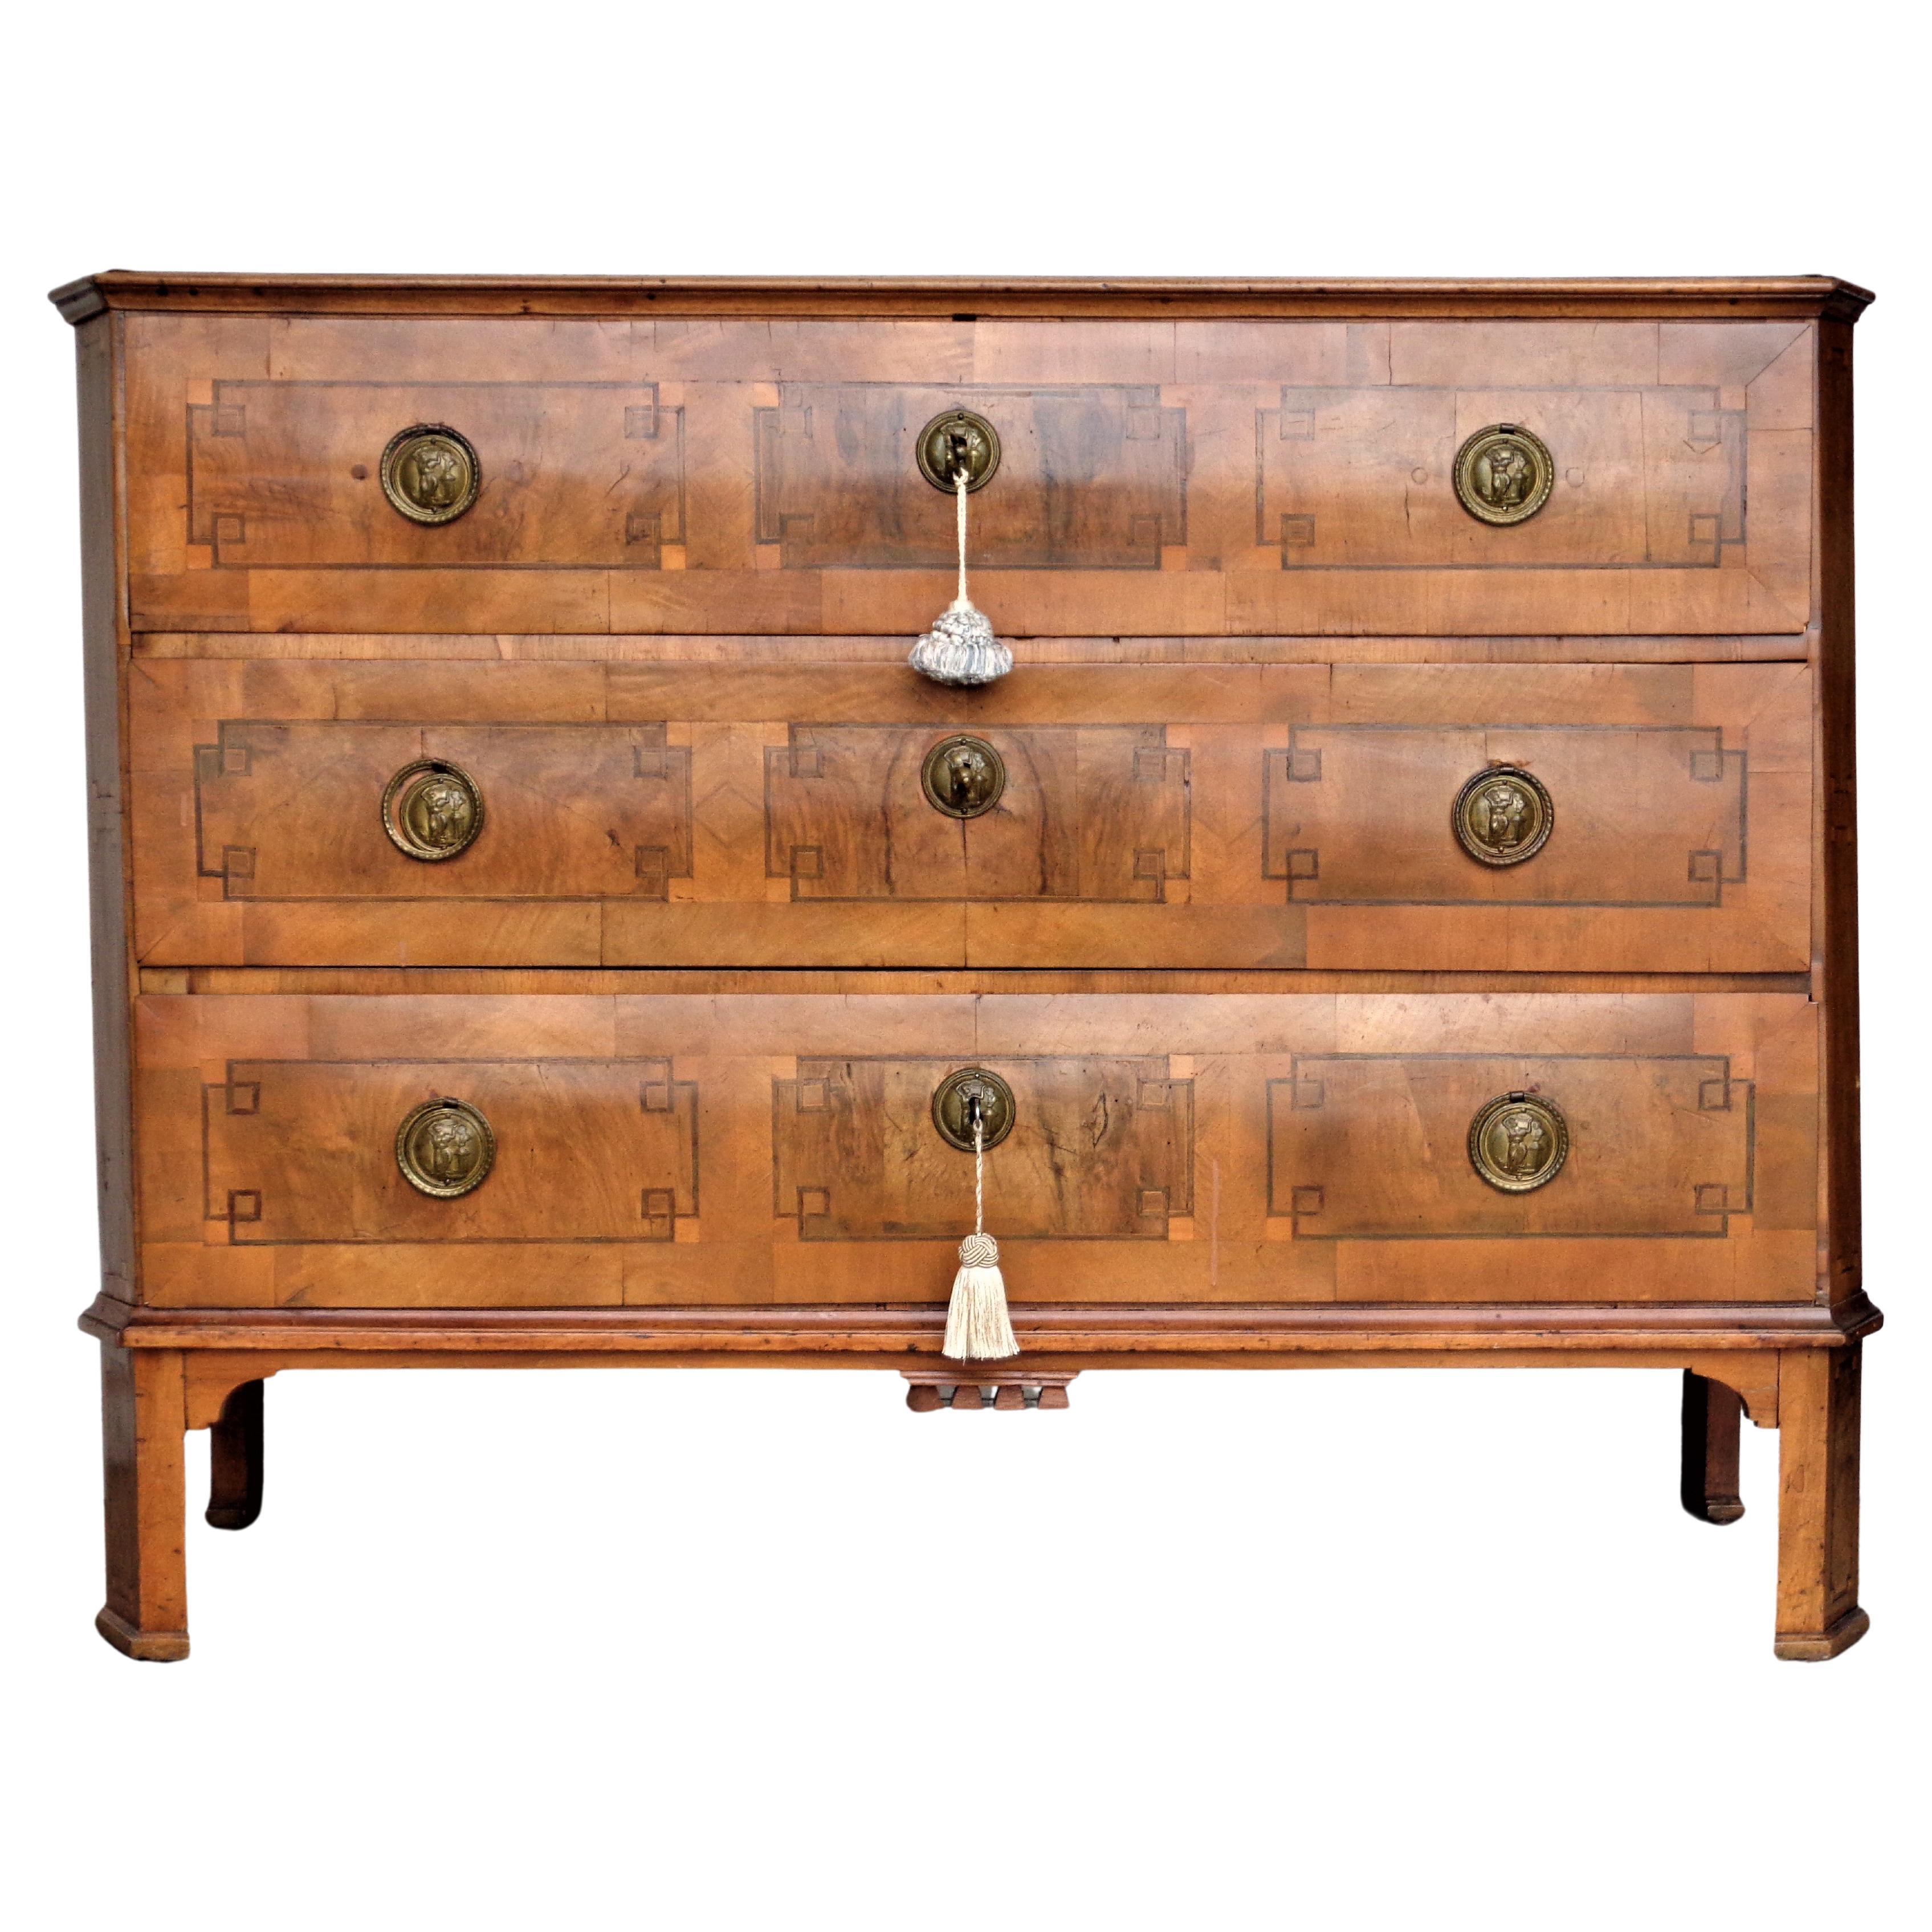 18th Century German Neoclassical Inlaid Chest of Drawers